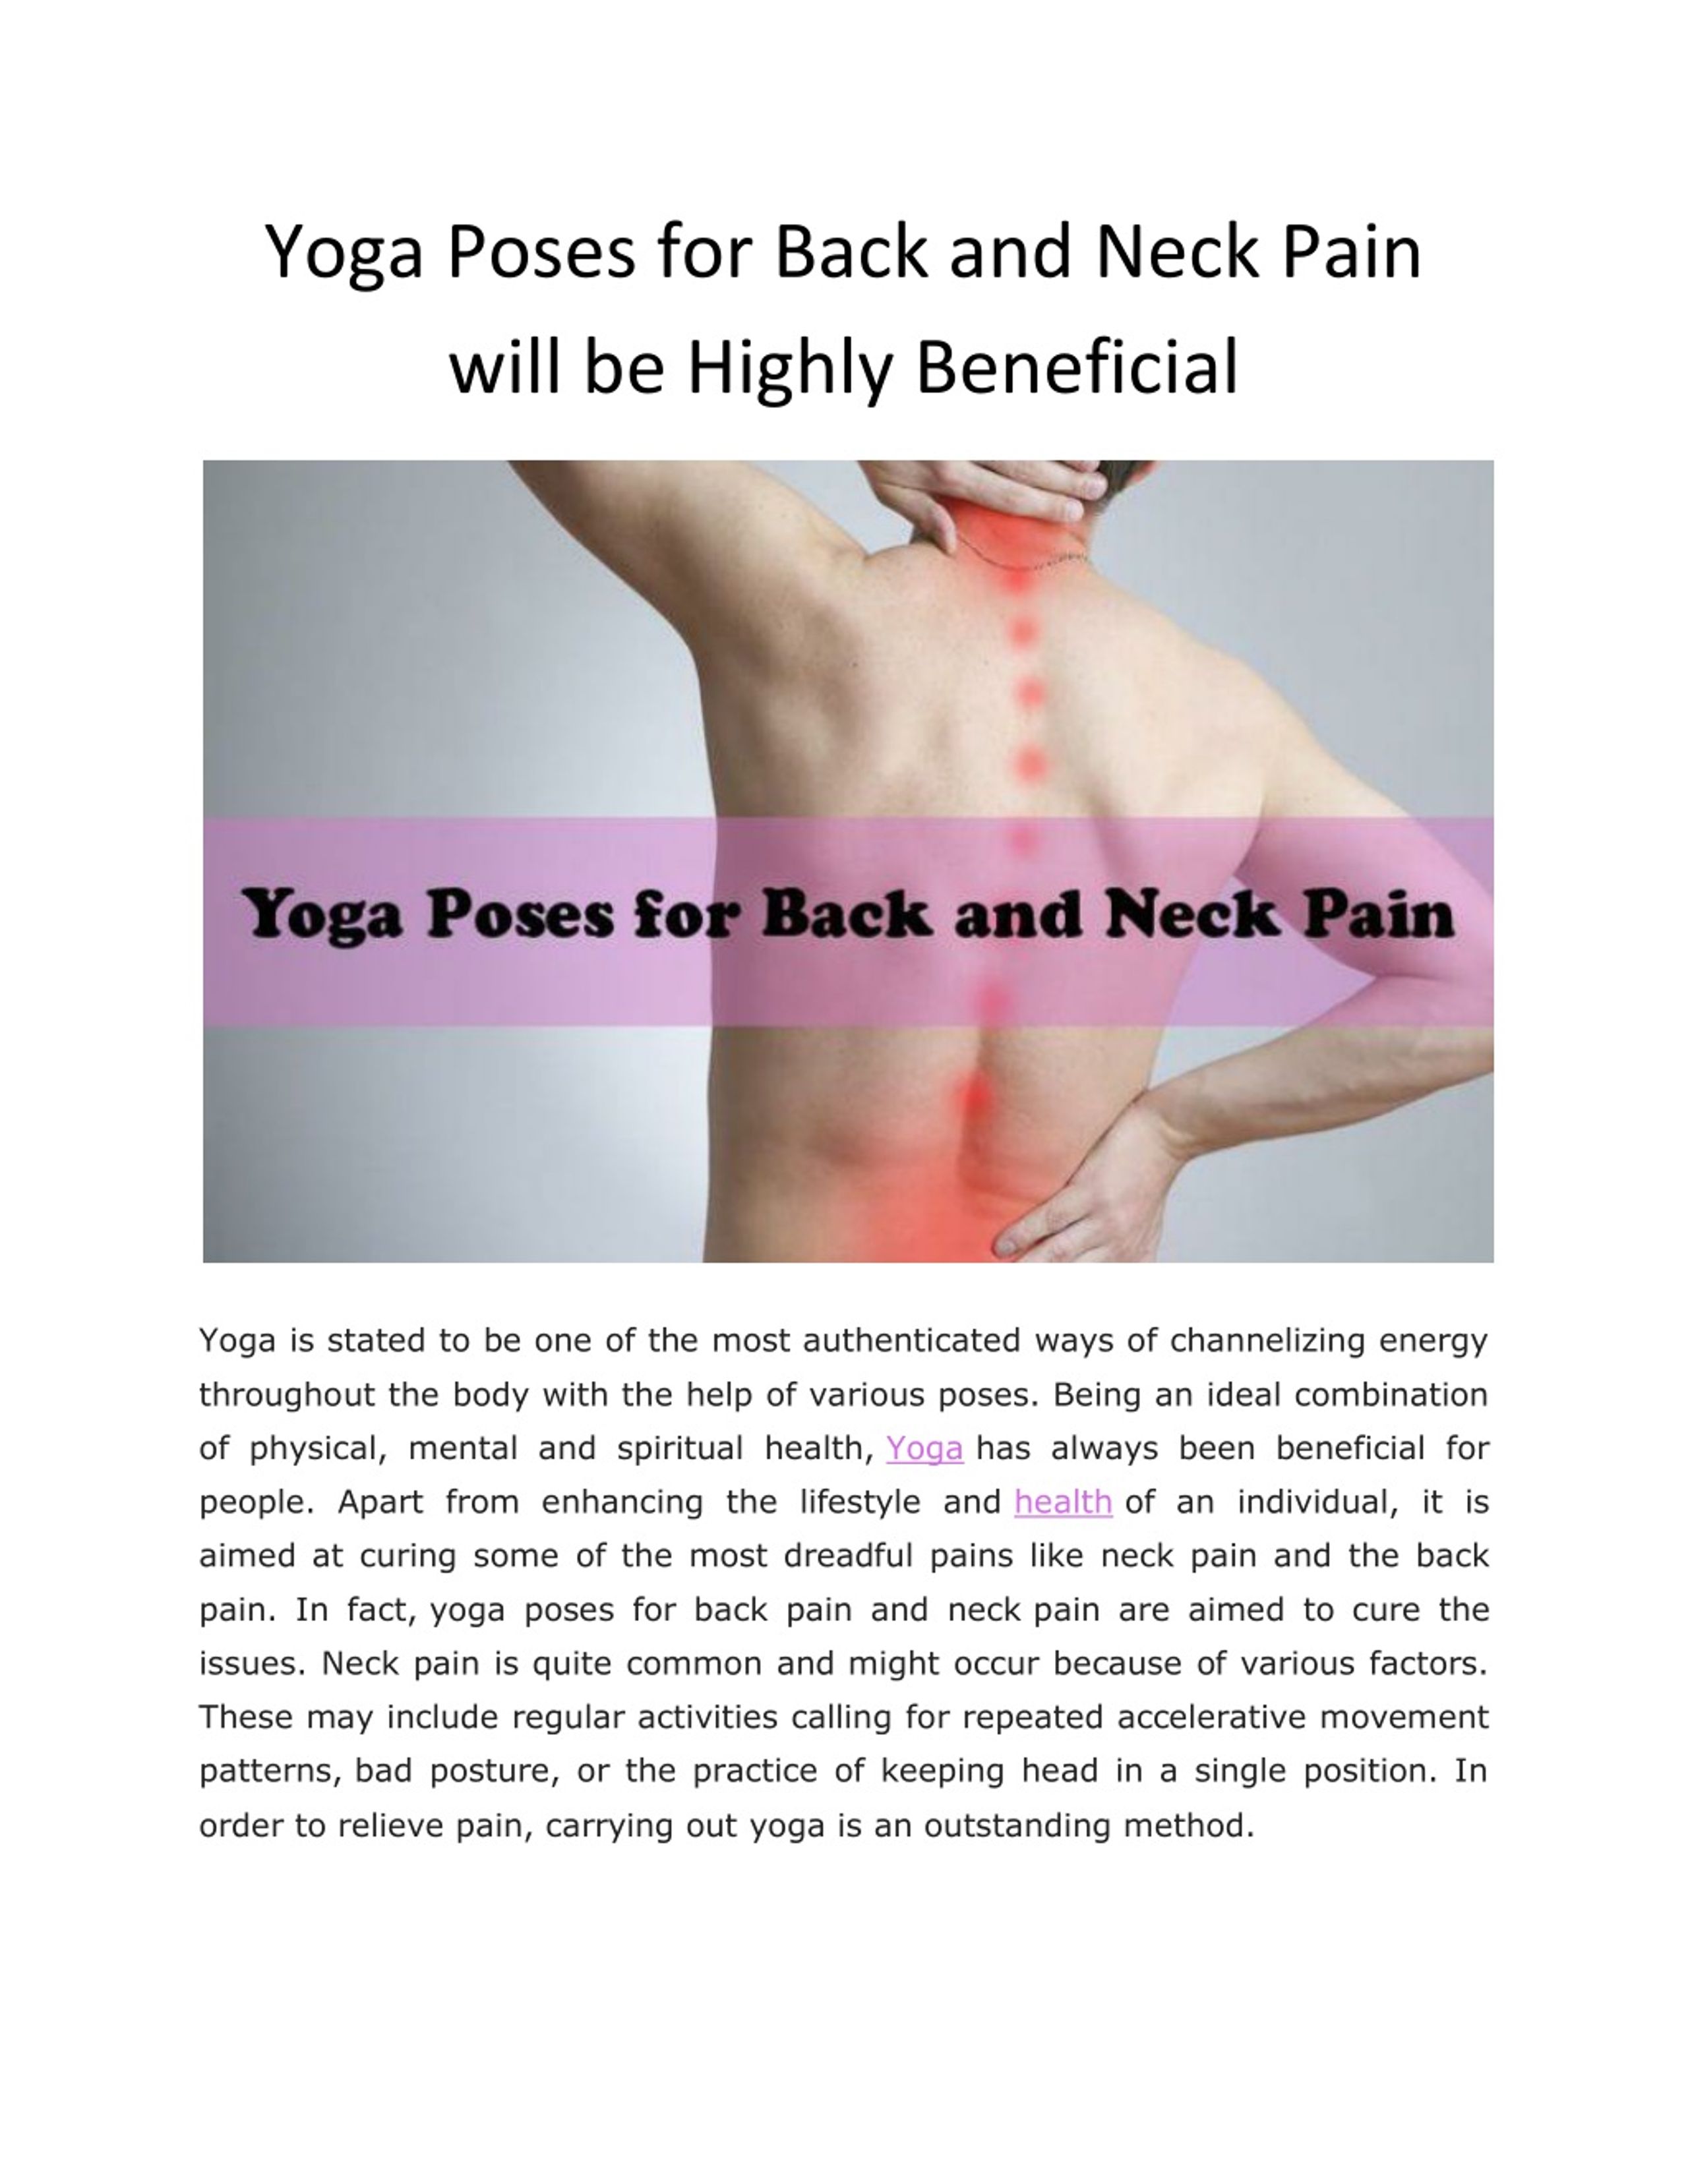 Spine lengthening poses promote good posture and proper alignment of the  vertebrae in both kyphosis and lordosis. ✷ Learn more ⇒ Yoga for… |  Instagram